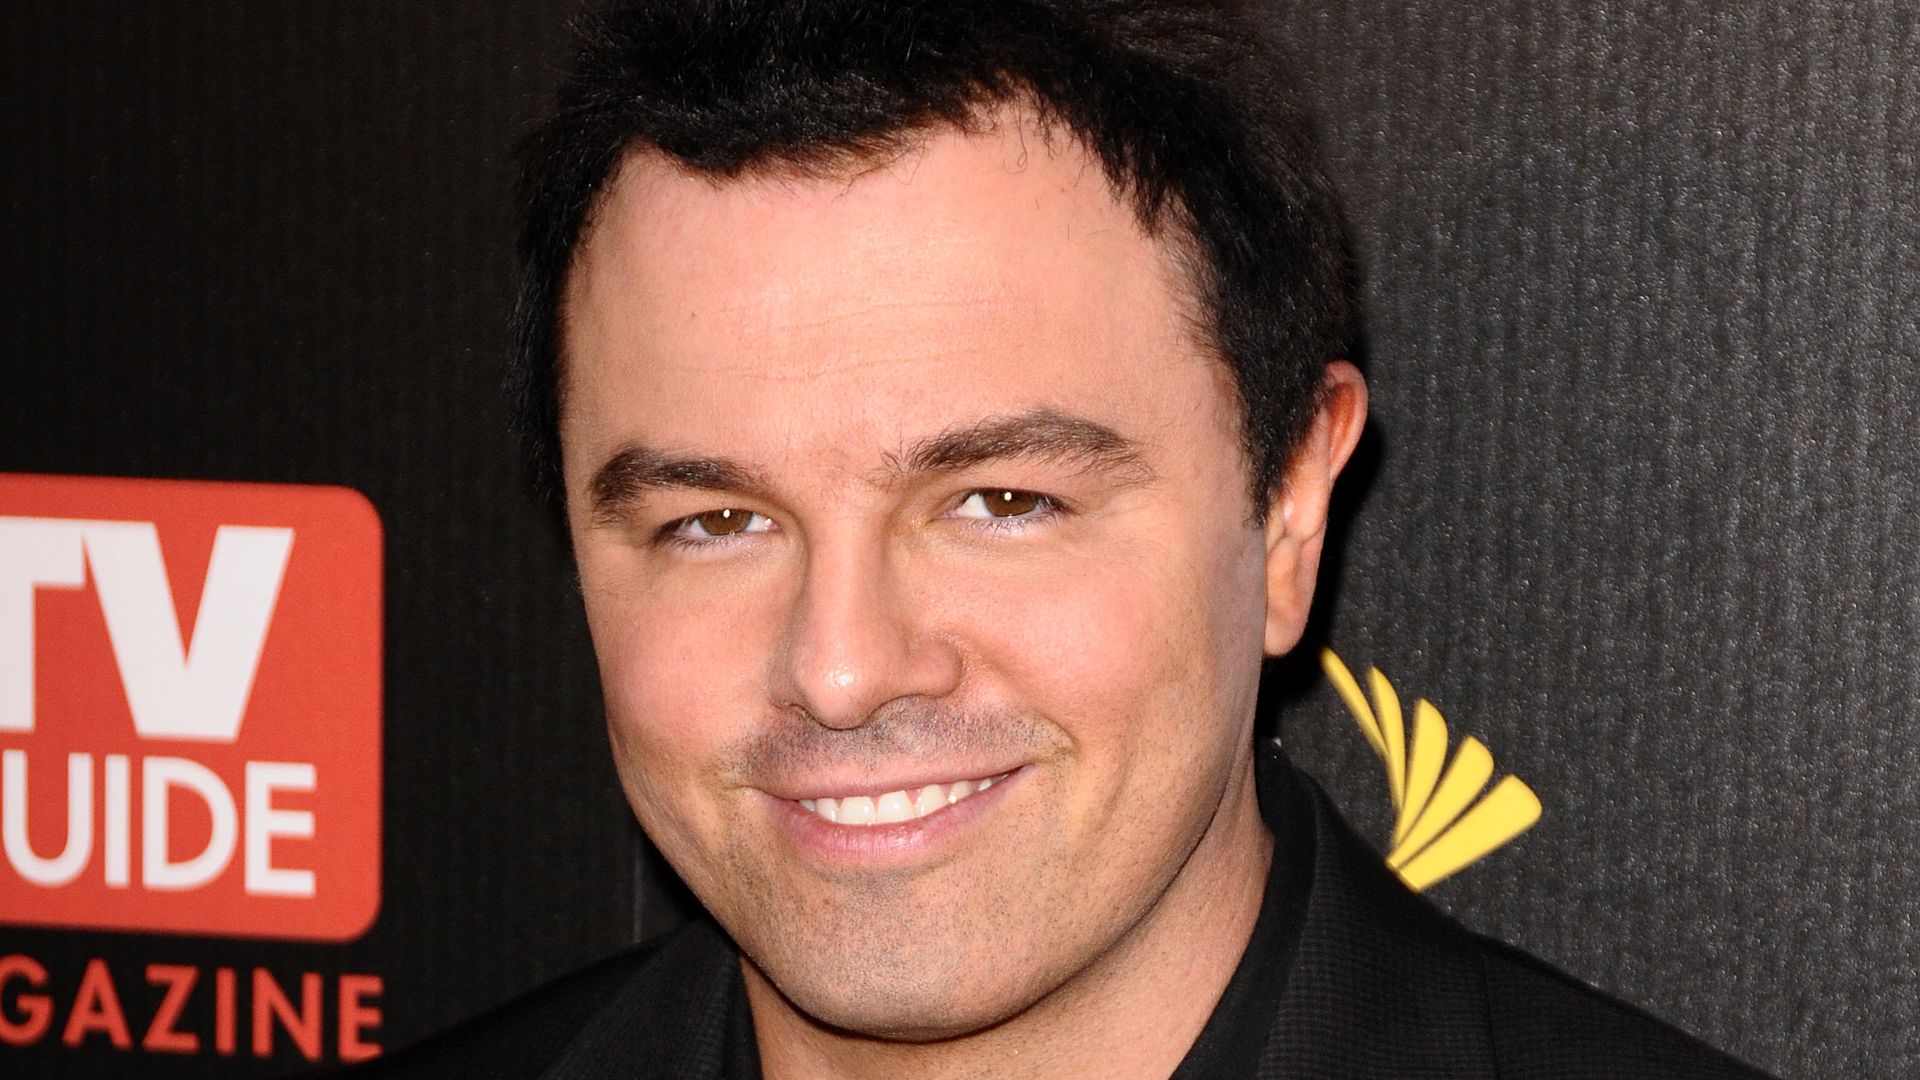 Seth MacFarlane attends TV Guide Magazine's Hot List Party at SLS Hotel on November 10, 2009 in Beverly Hills, California.